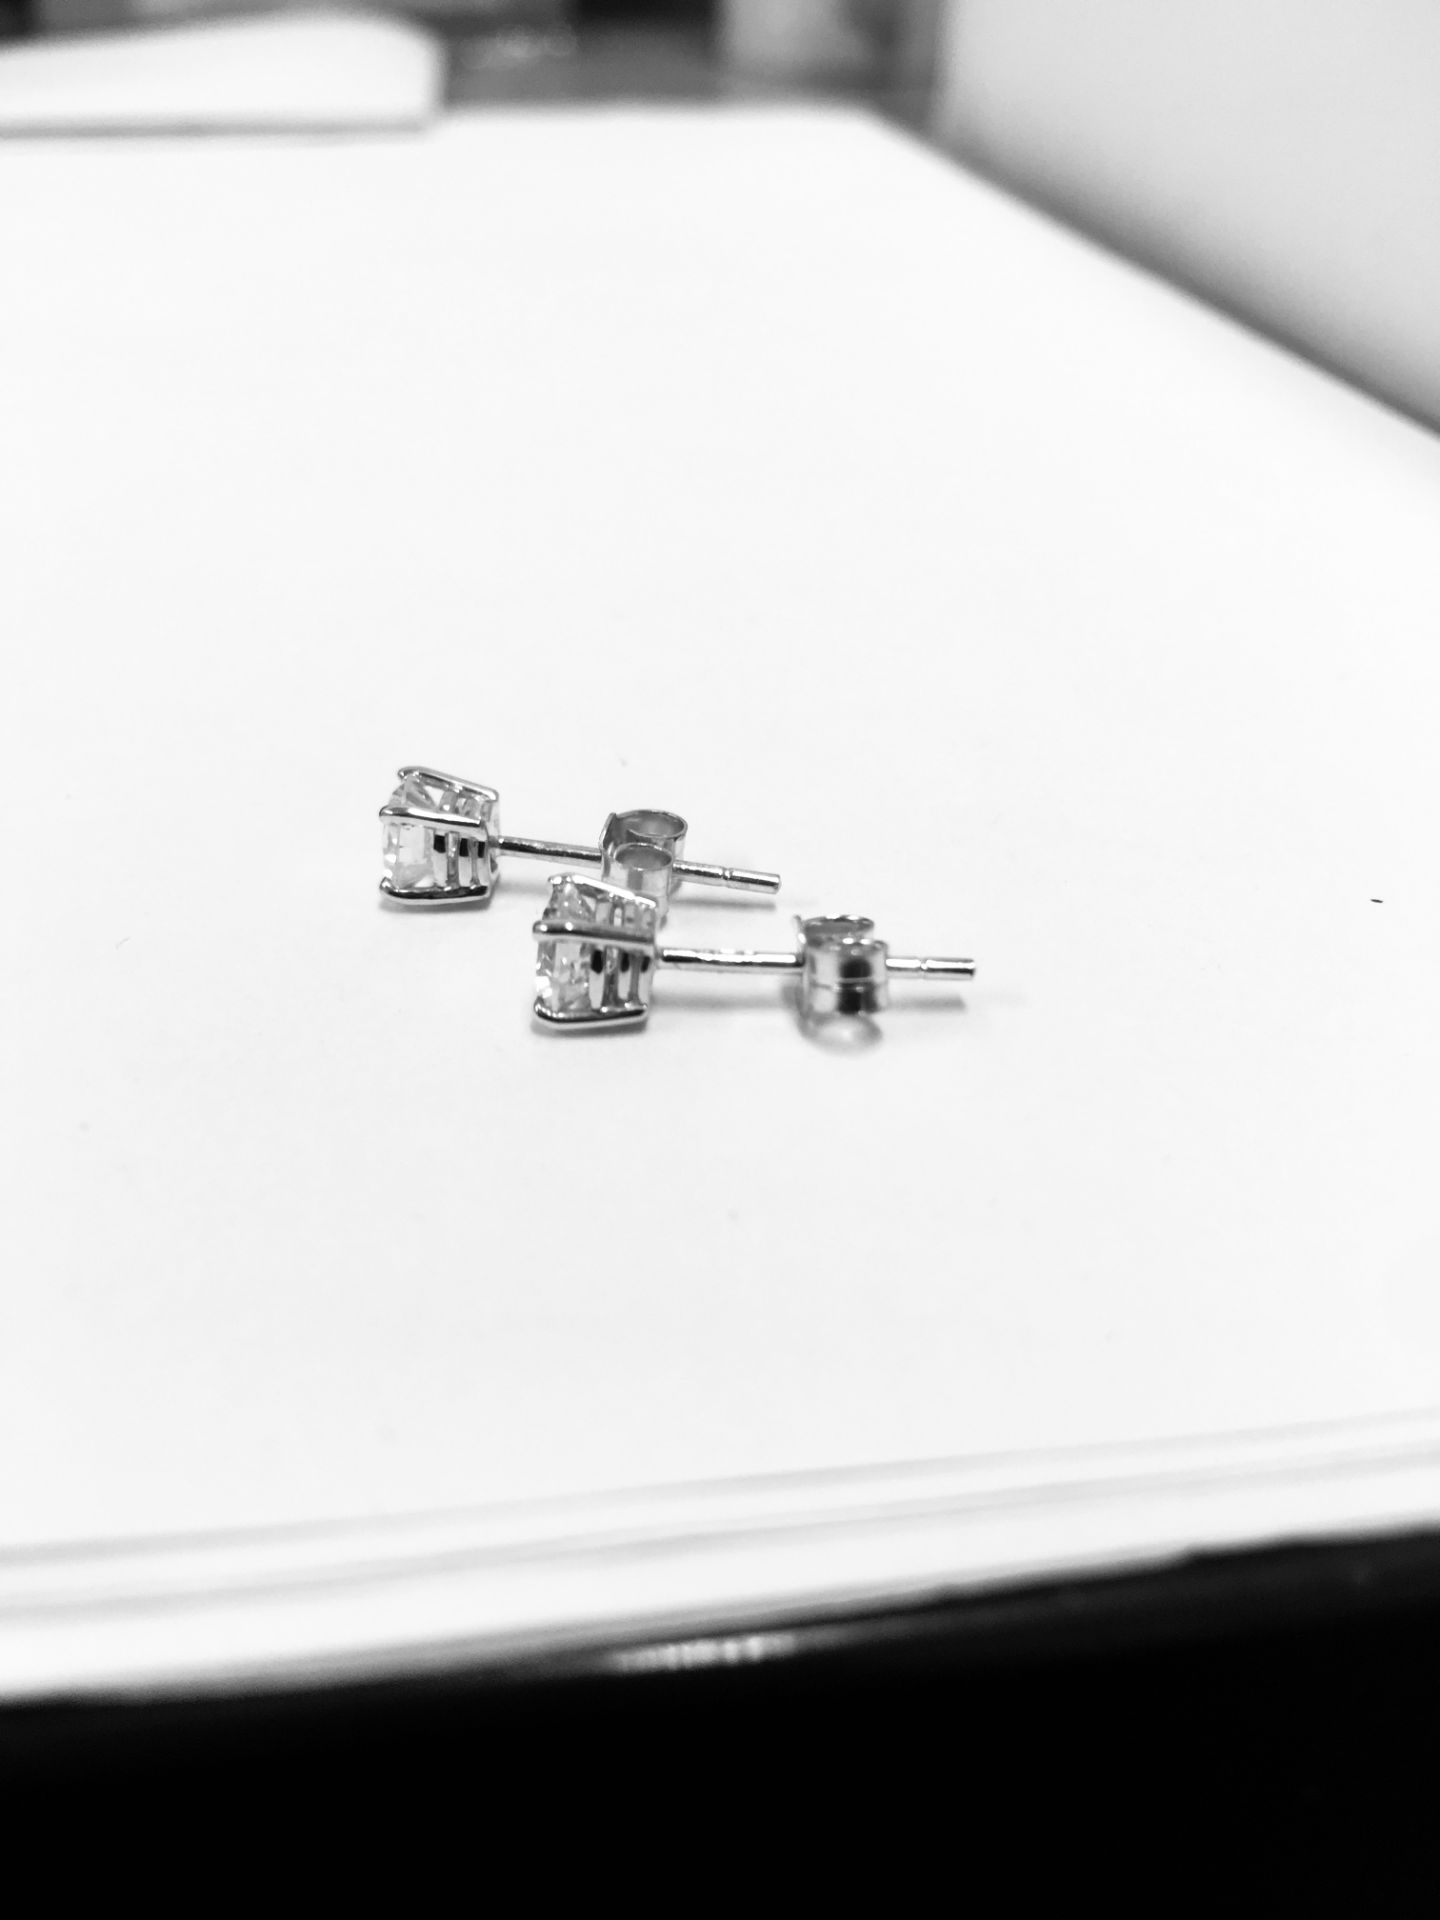 1.00Ct Diamond Solitaire Earrings Set In 18Ct White Gold. - Image 8 of 18